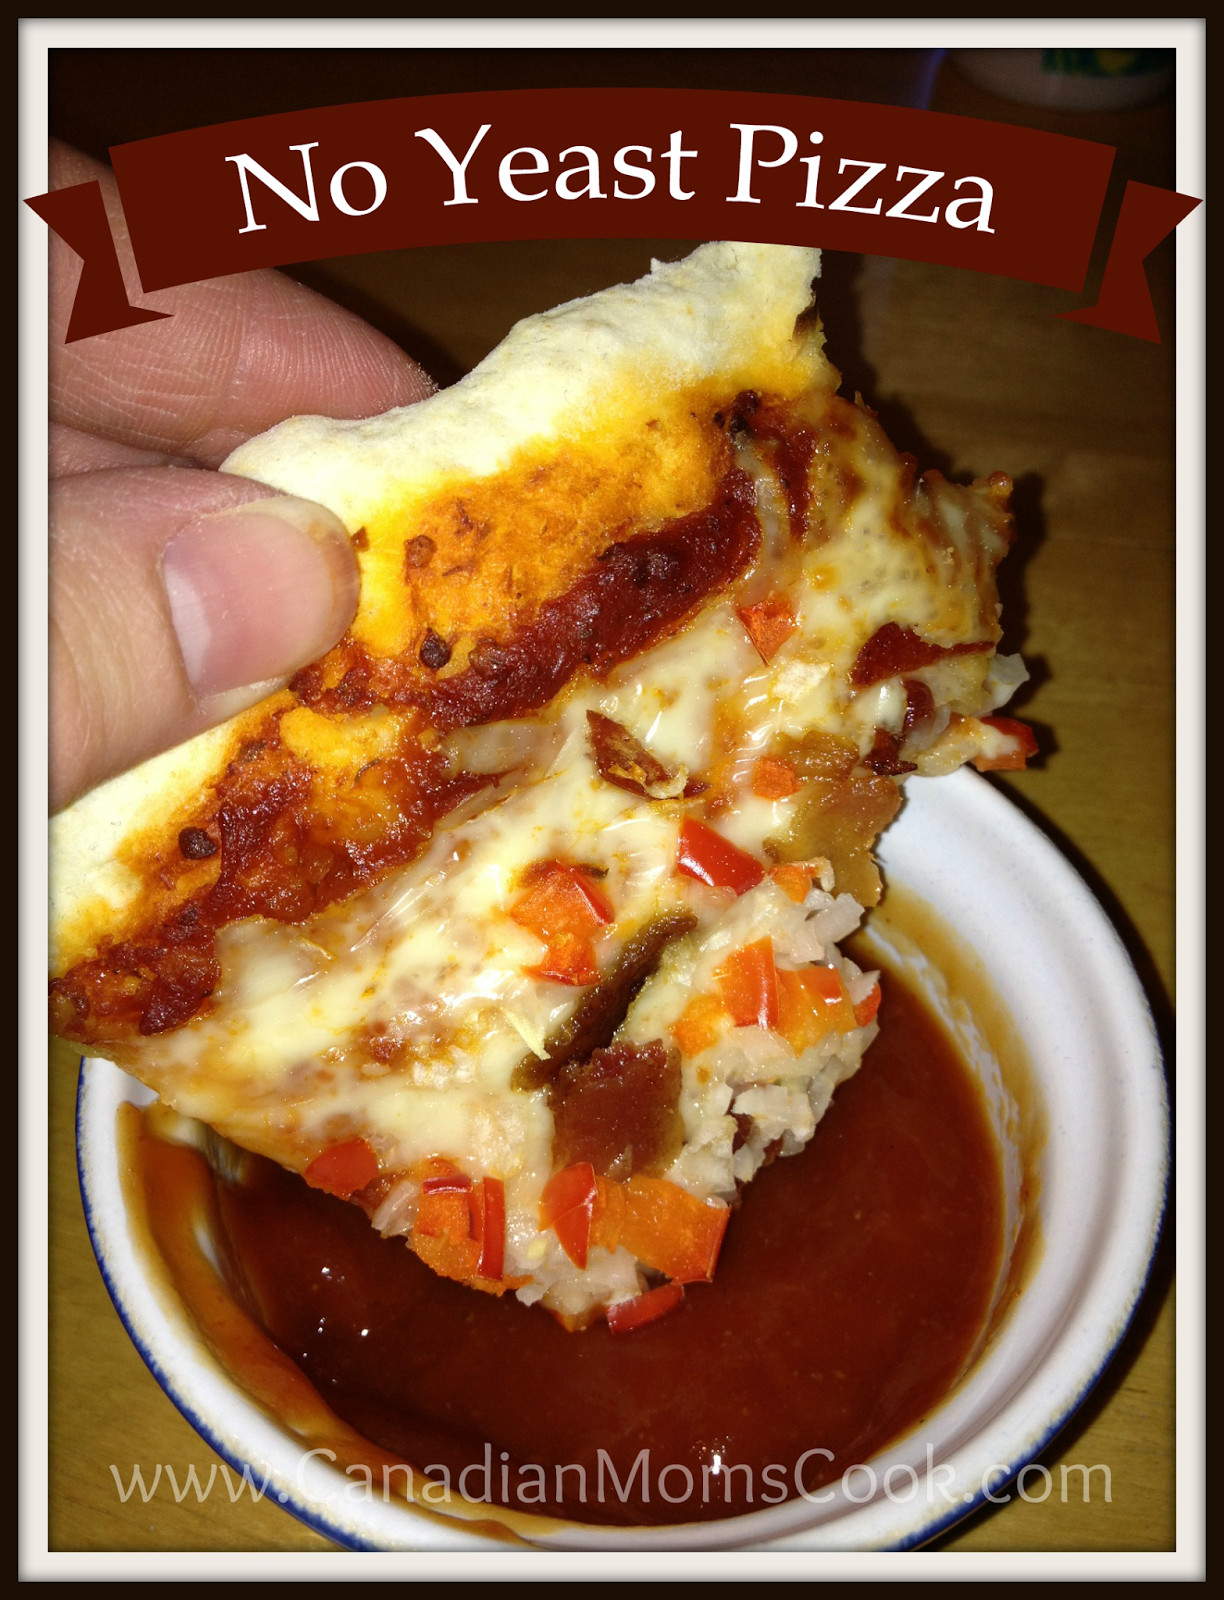 Pizza Dough No Yeast
 Canadian Moms Cook